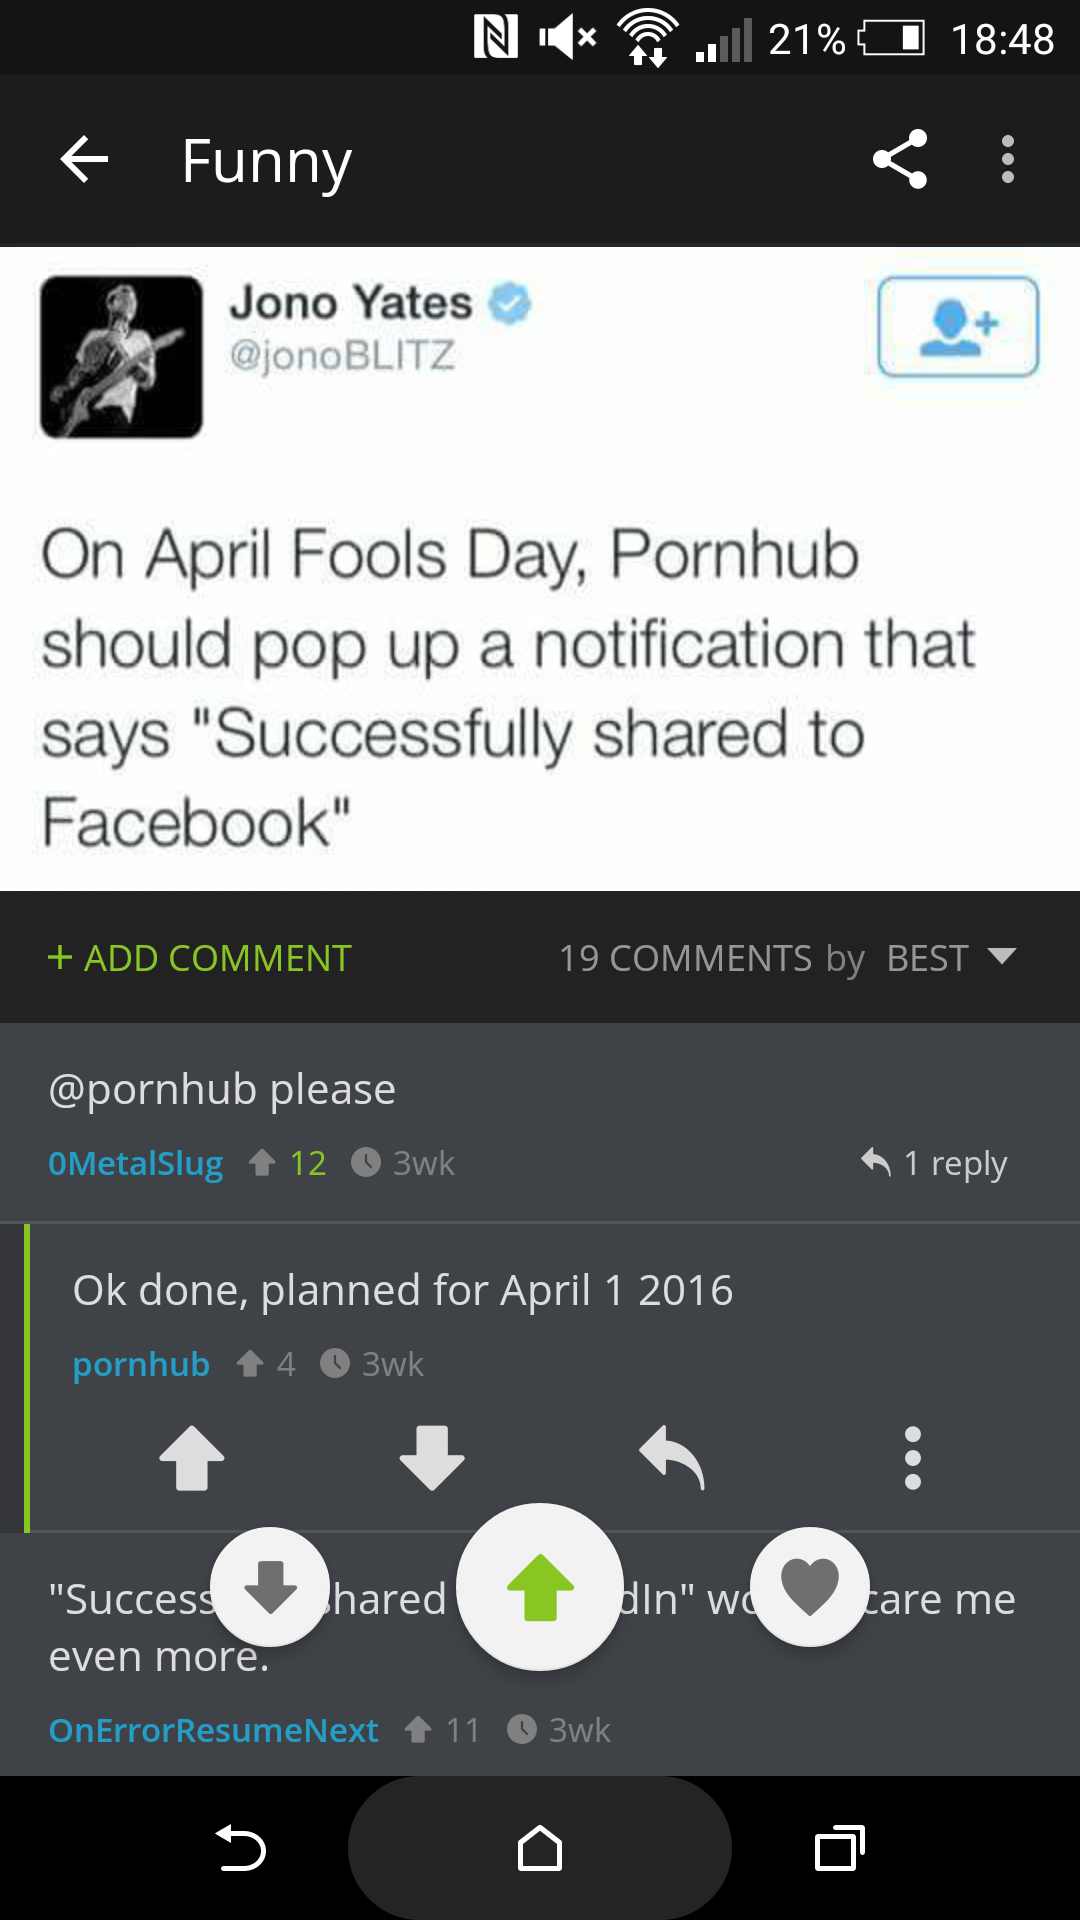 pornhub april fools joke - N . 21% f Funny Jono Yates jonoBLITZ On April Fools Day, Pornhub should pop up a notification that says "Successfully d to Facebook" Add Comment 19 by Best please Metalig 12 wk 1 Ok done, planned for pornhub 4 Wk In" we are me "